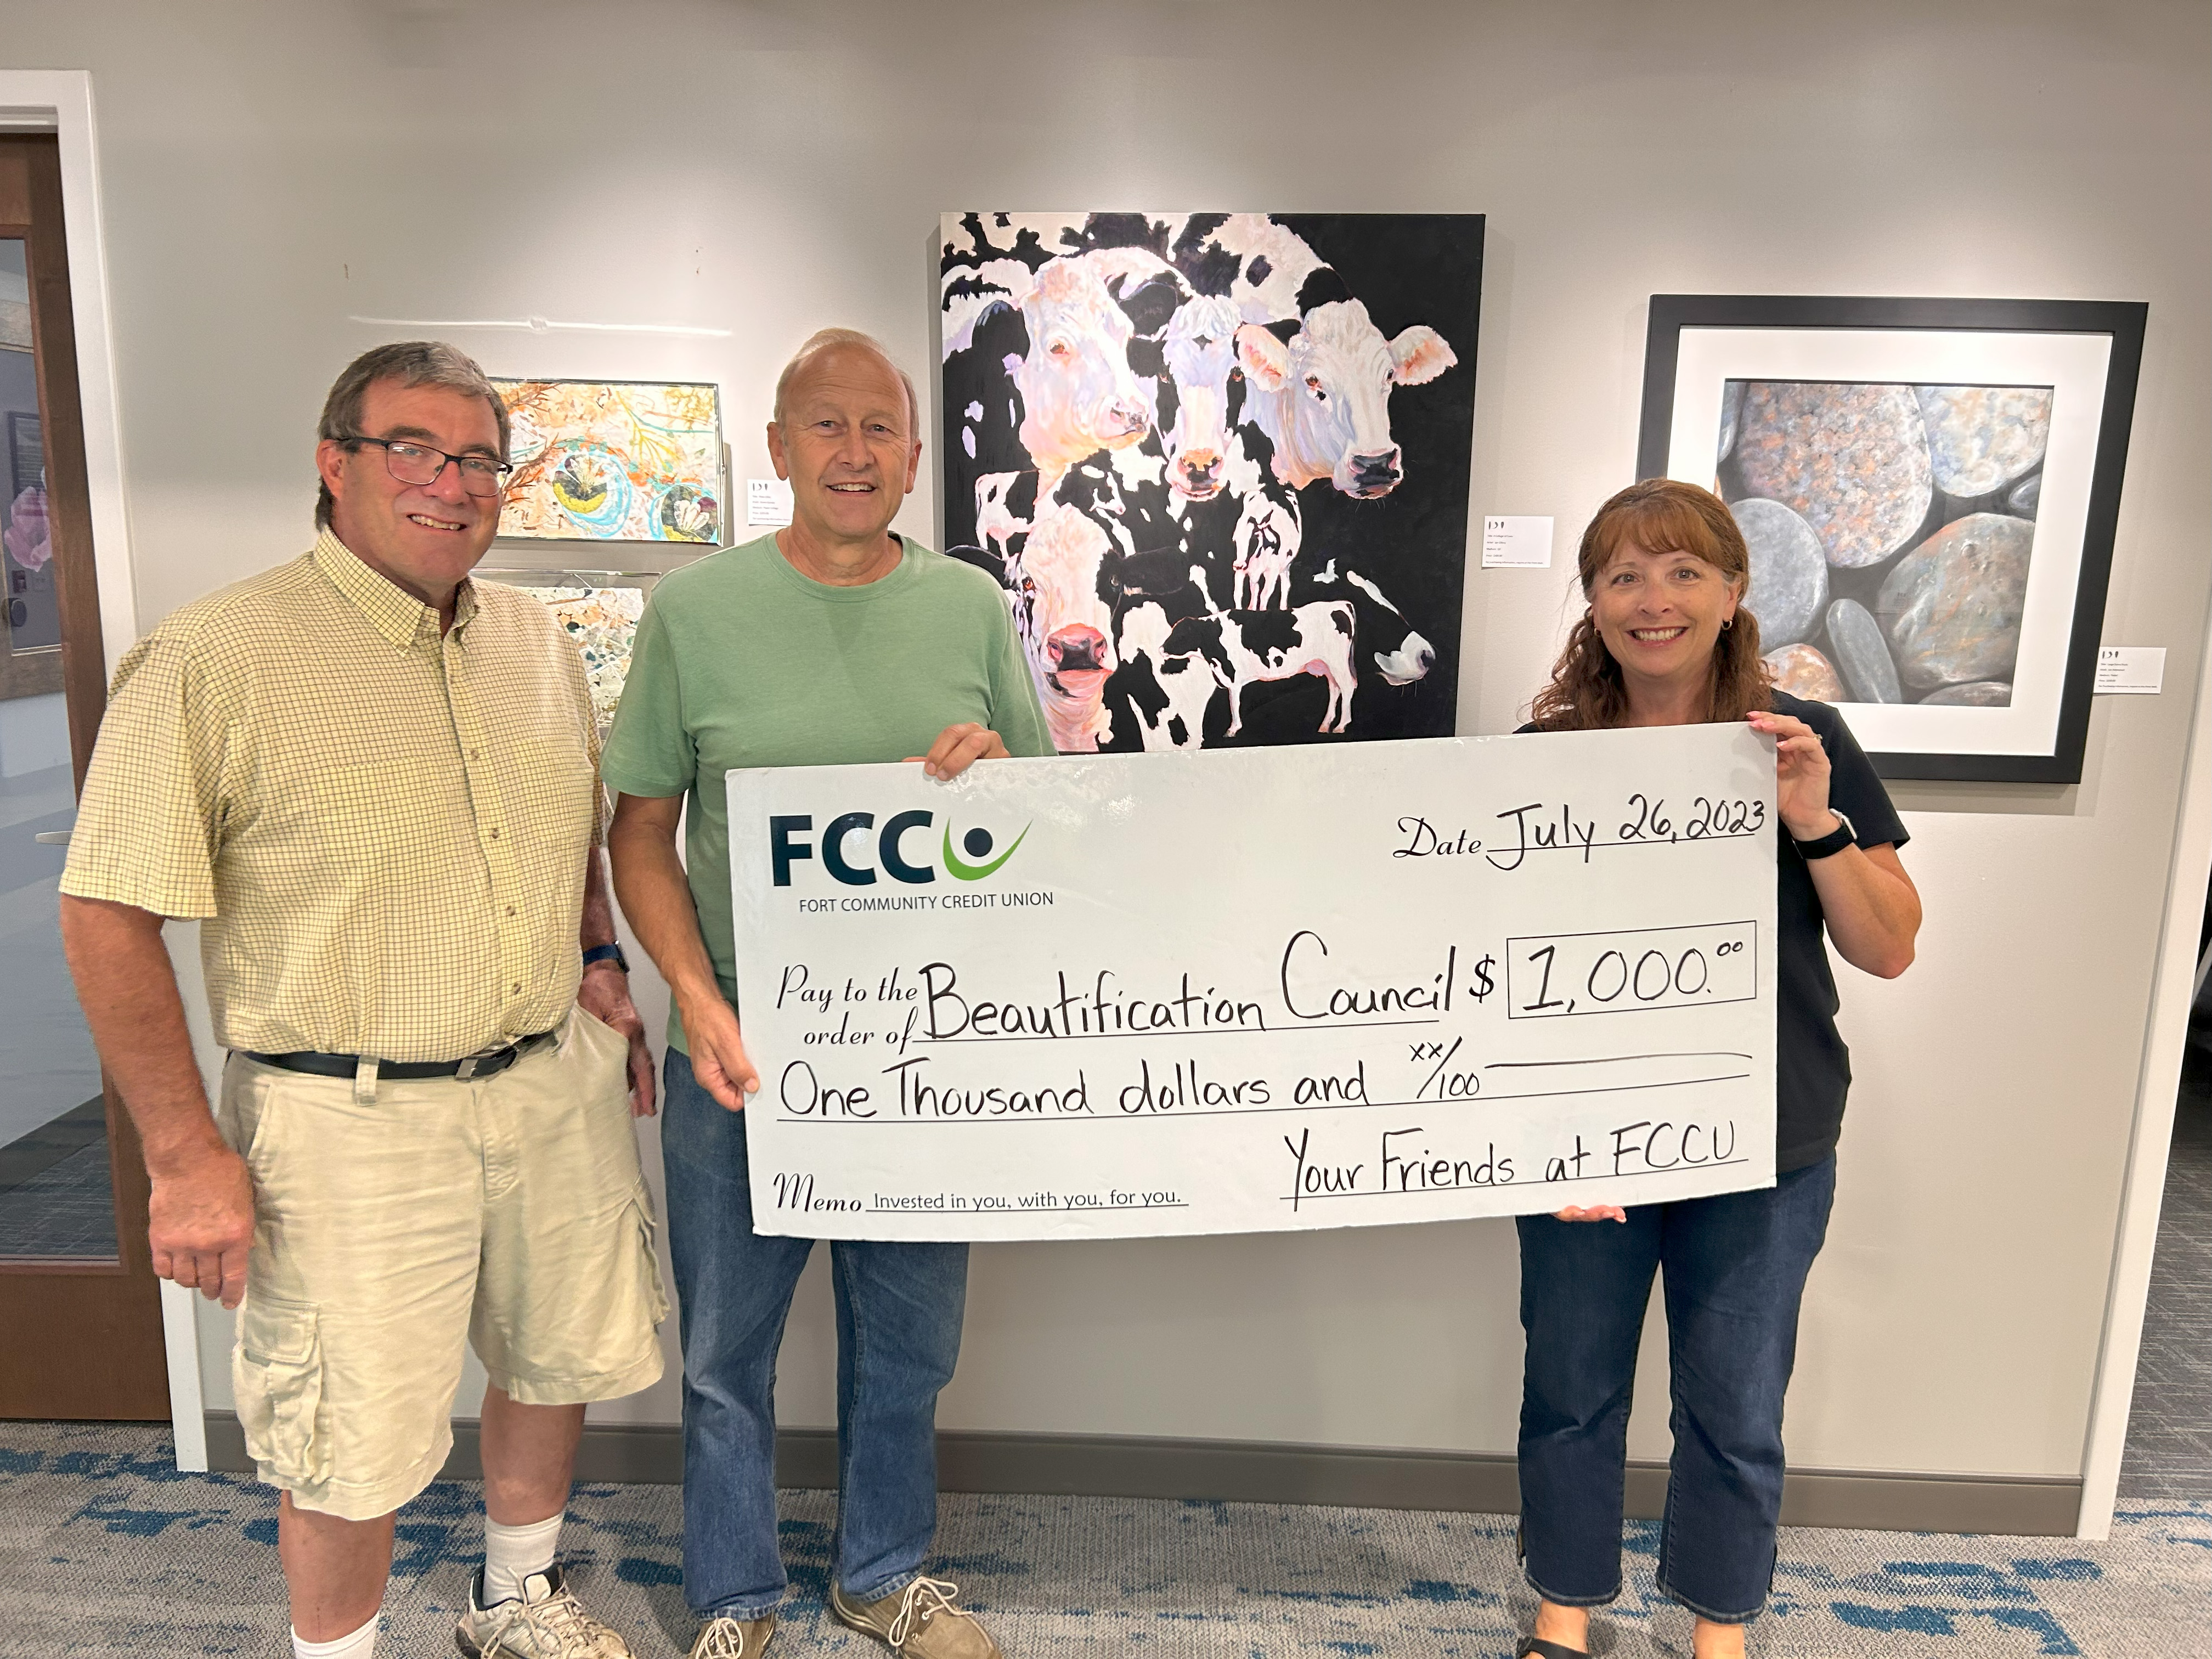 Photo of two men (Jude Hartwick, Alan Cook) and a woman (Sue Johnson) holding an oversized check for $1,000 written out to the Beautification Council from 'Your Friends at FCCU"